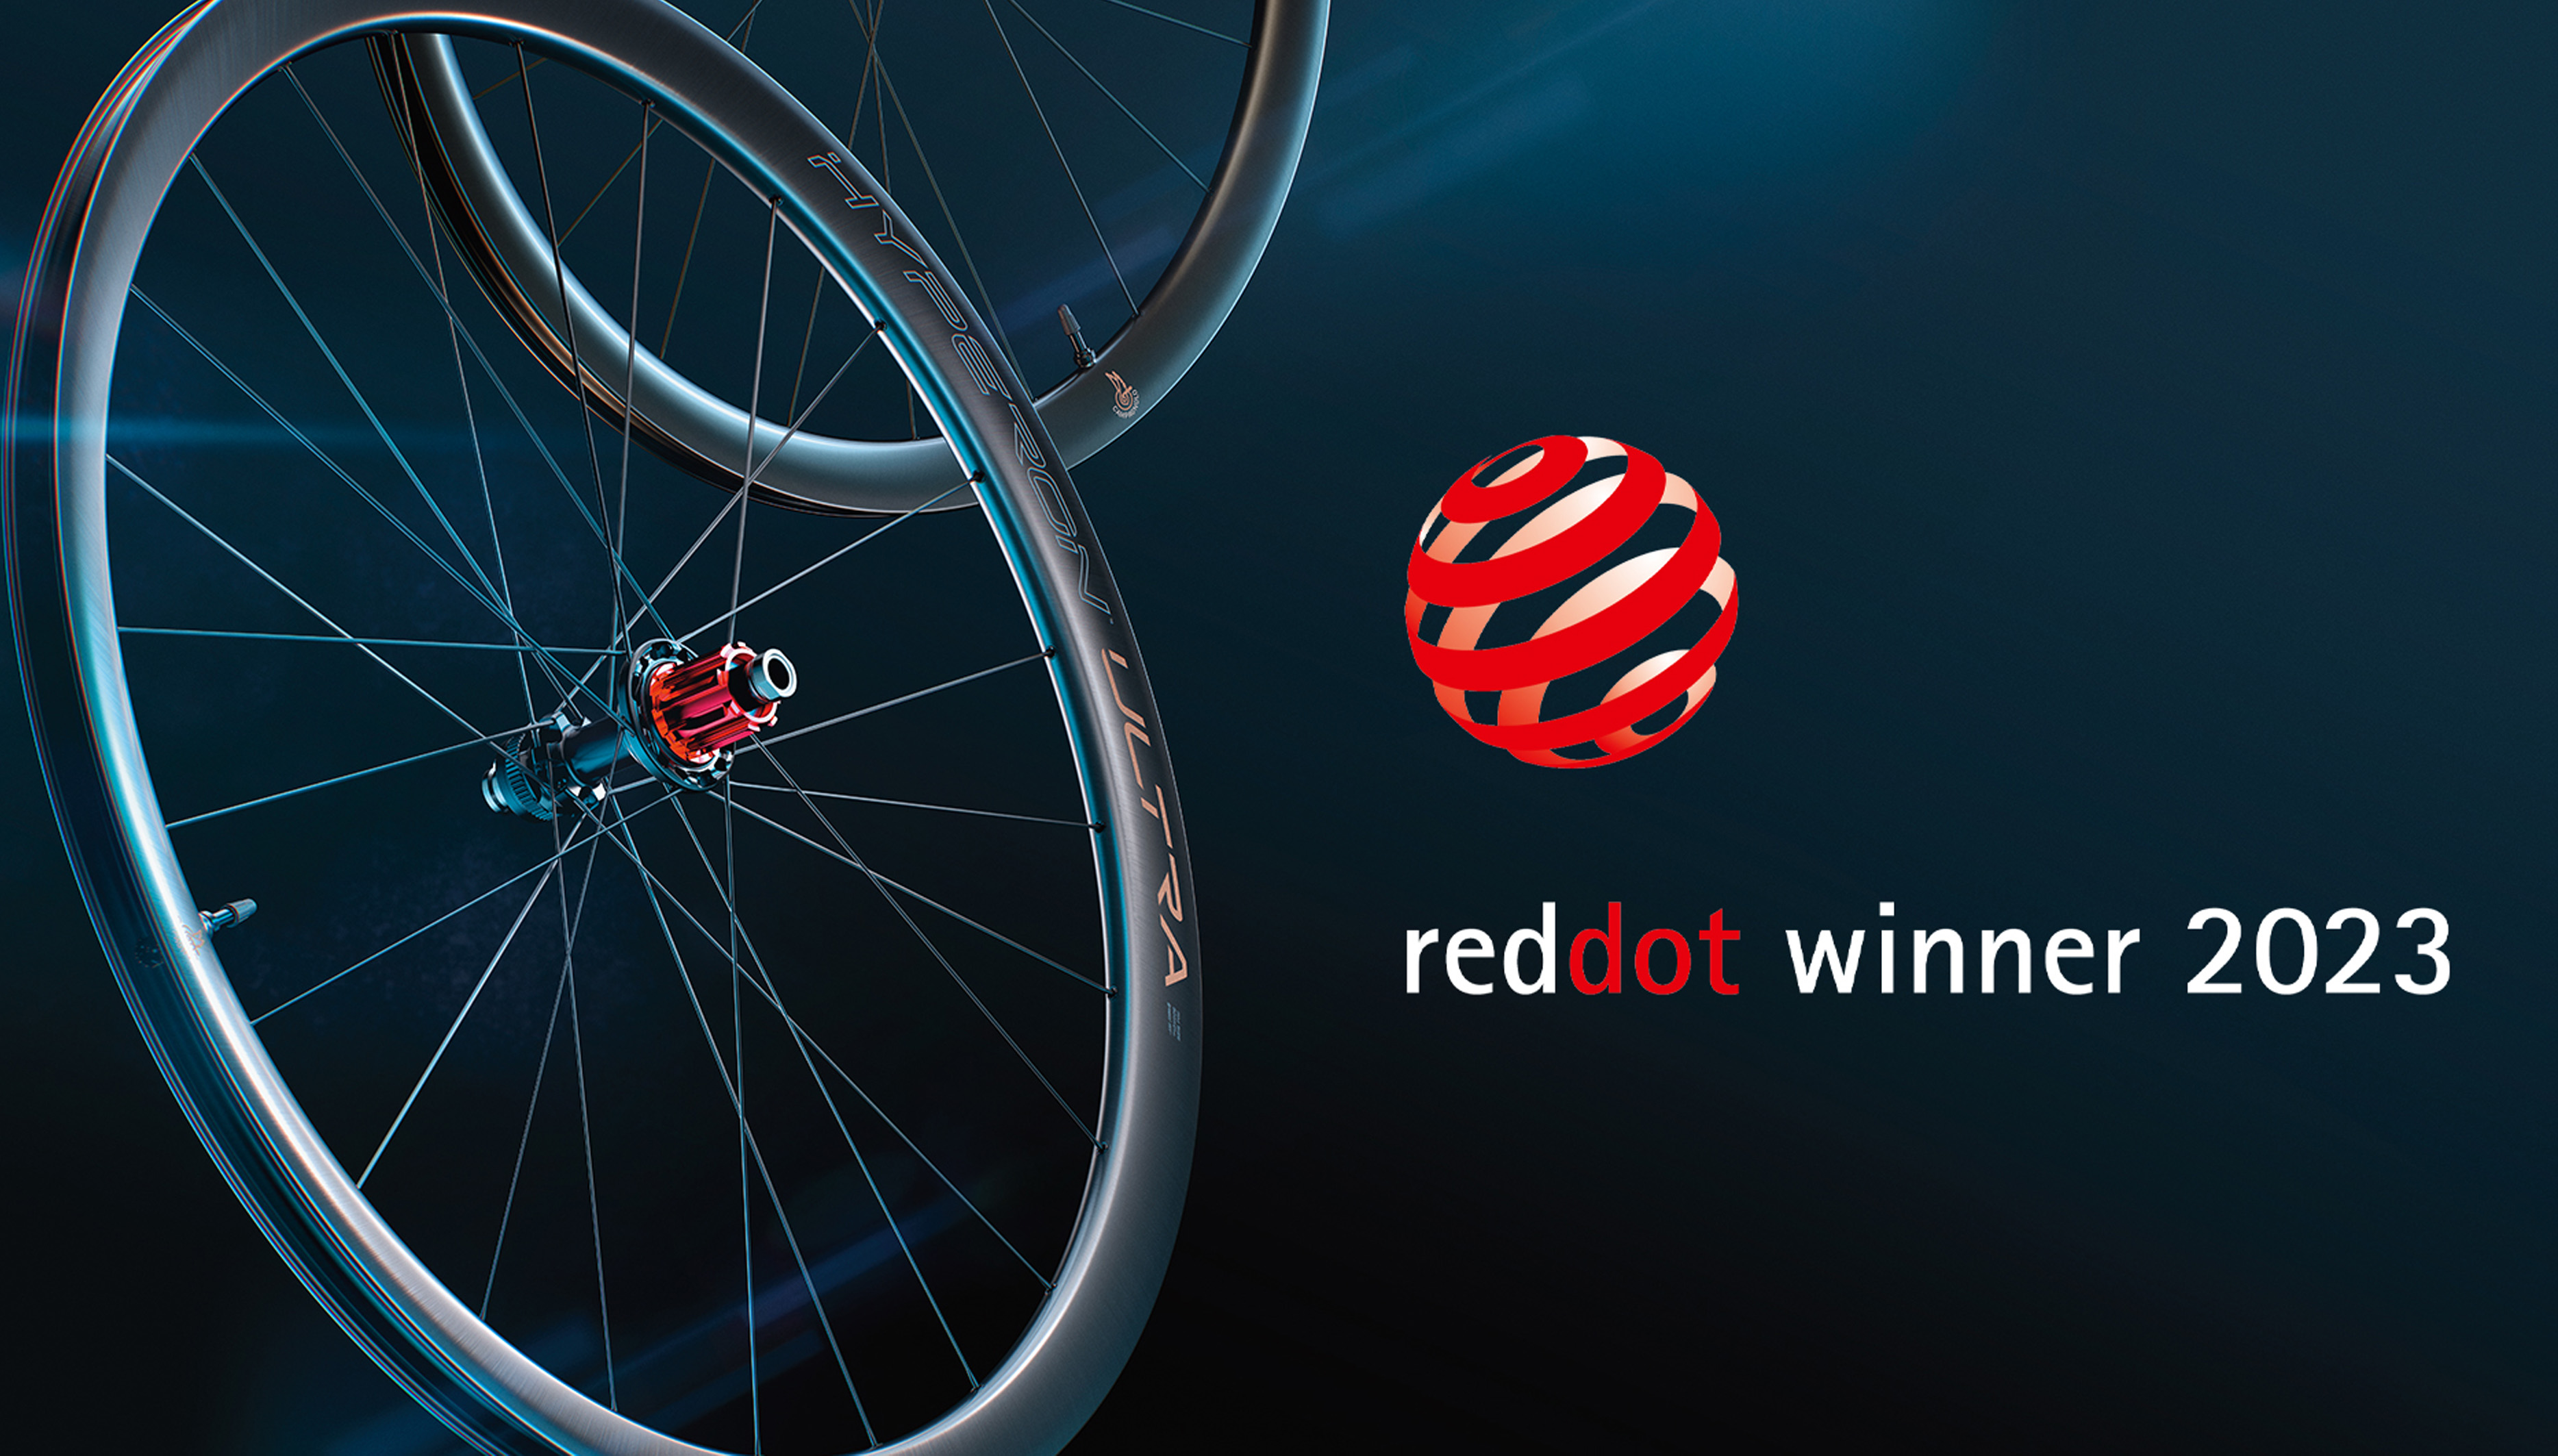 Successfull launch of the Hyperon Ultra results in winning the Red Dot Brands & Communications Design Award 2023